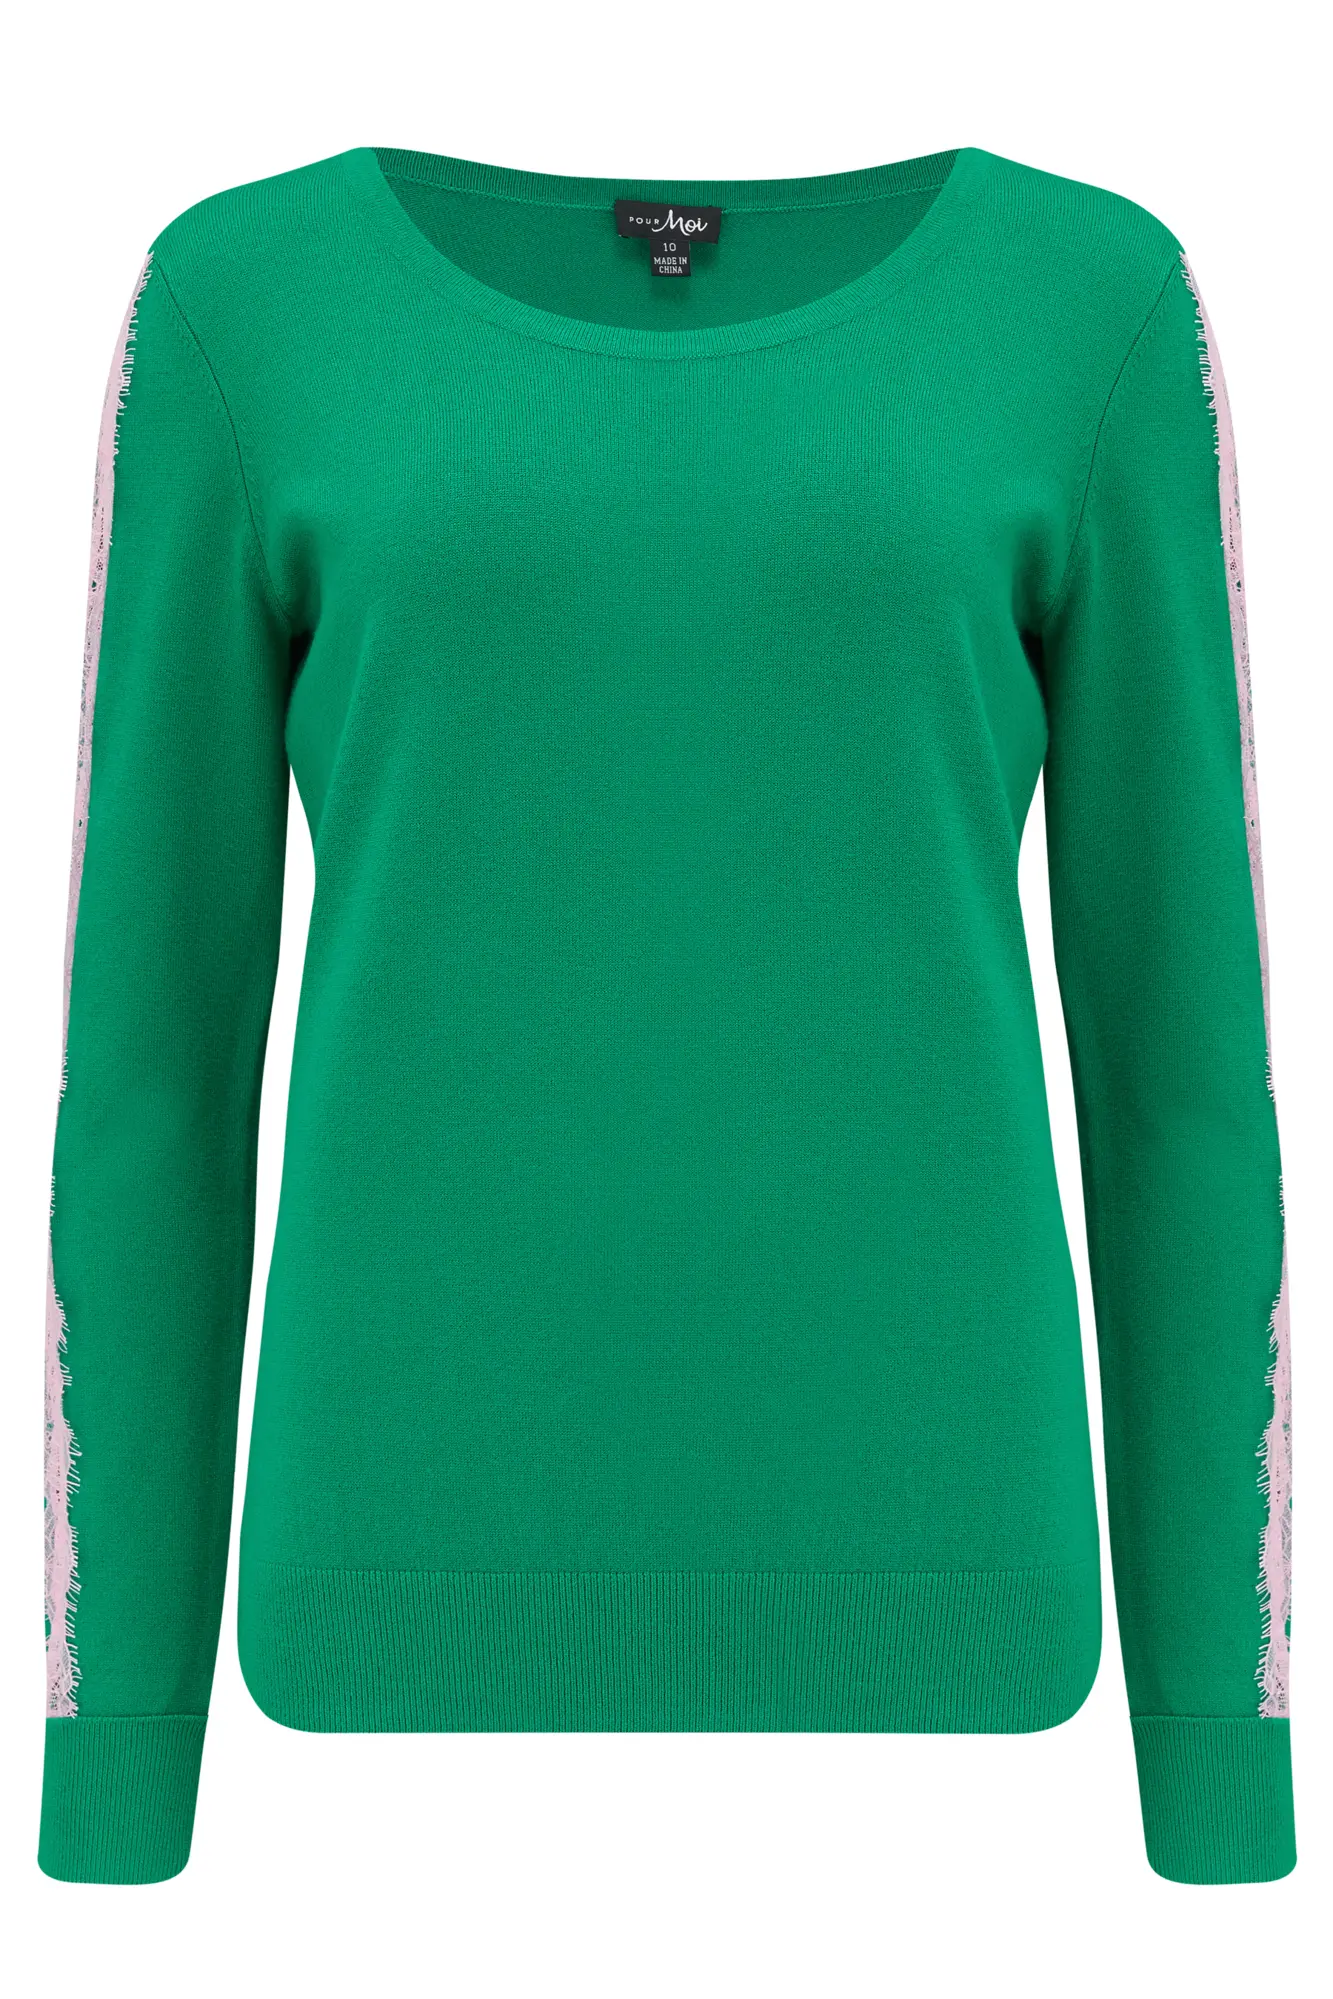 Lace Sleeve Insert Knit Jumper with LENZING™ ECOVERO™ Viscose | Green ...